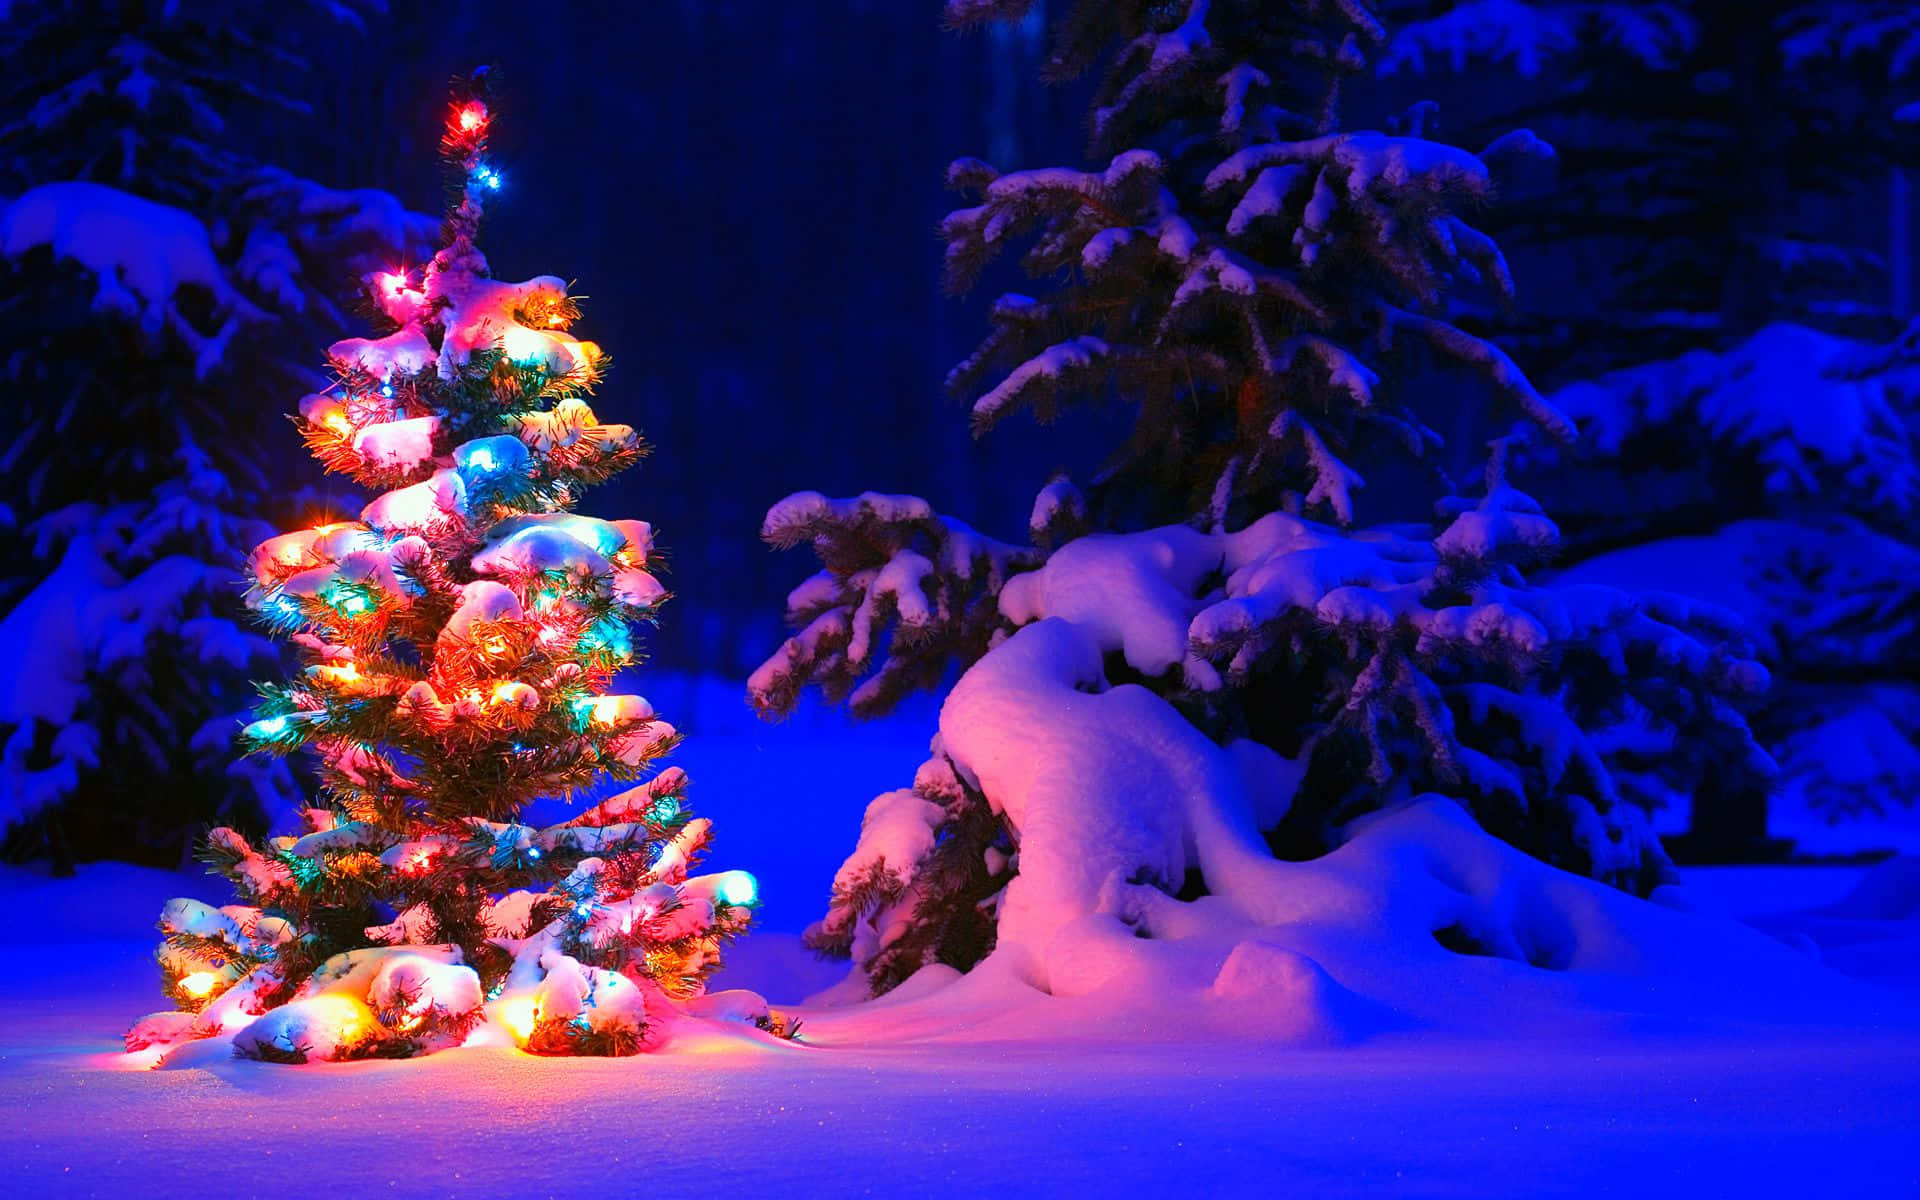 Celebrate the Holiday Season with this Beautiful Christmas Desktop Wallpaper Wallpaper